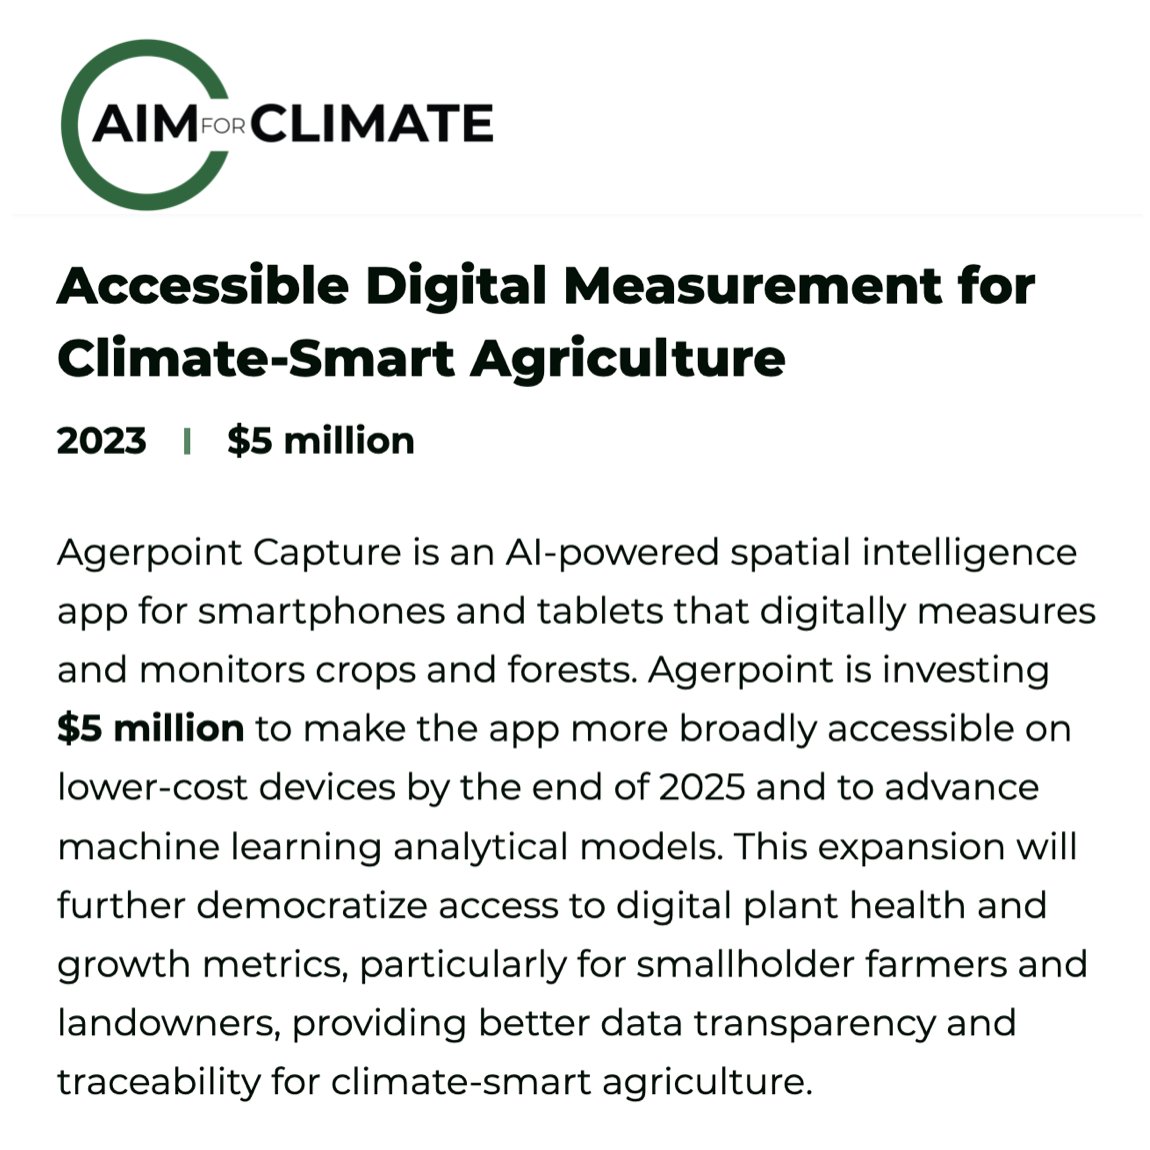 Agerpoint is thrilled to launch one of 27 new Innovation Sprints at #COP28 via the @AIMforClimate initiative. We’re advancing & scaling smartphone-based data capture & AI analytics to help reduce emissions, enhance soil carbon sequestration, and more. #AIM4C #ClimateSmartAg